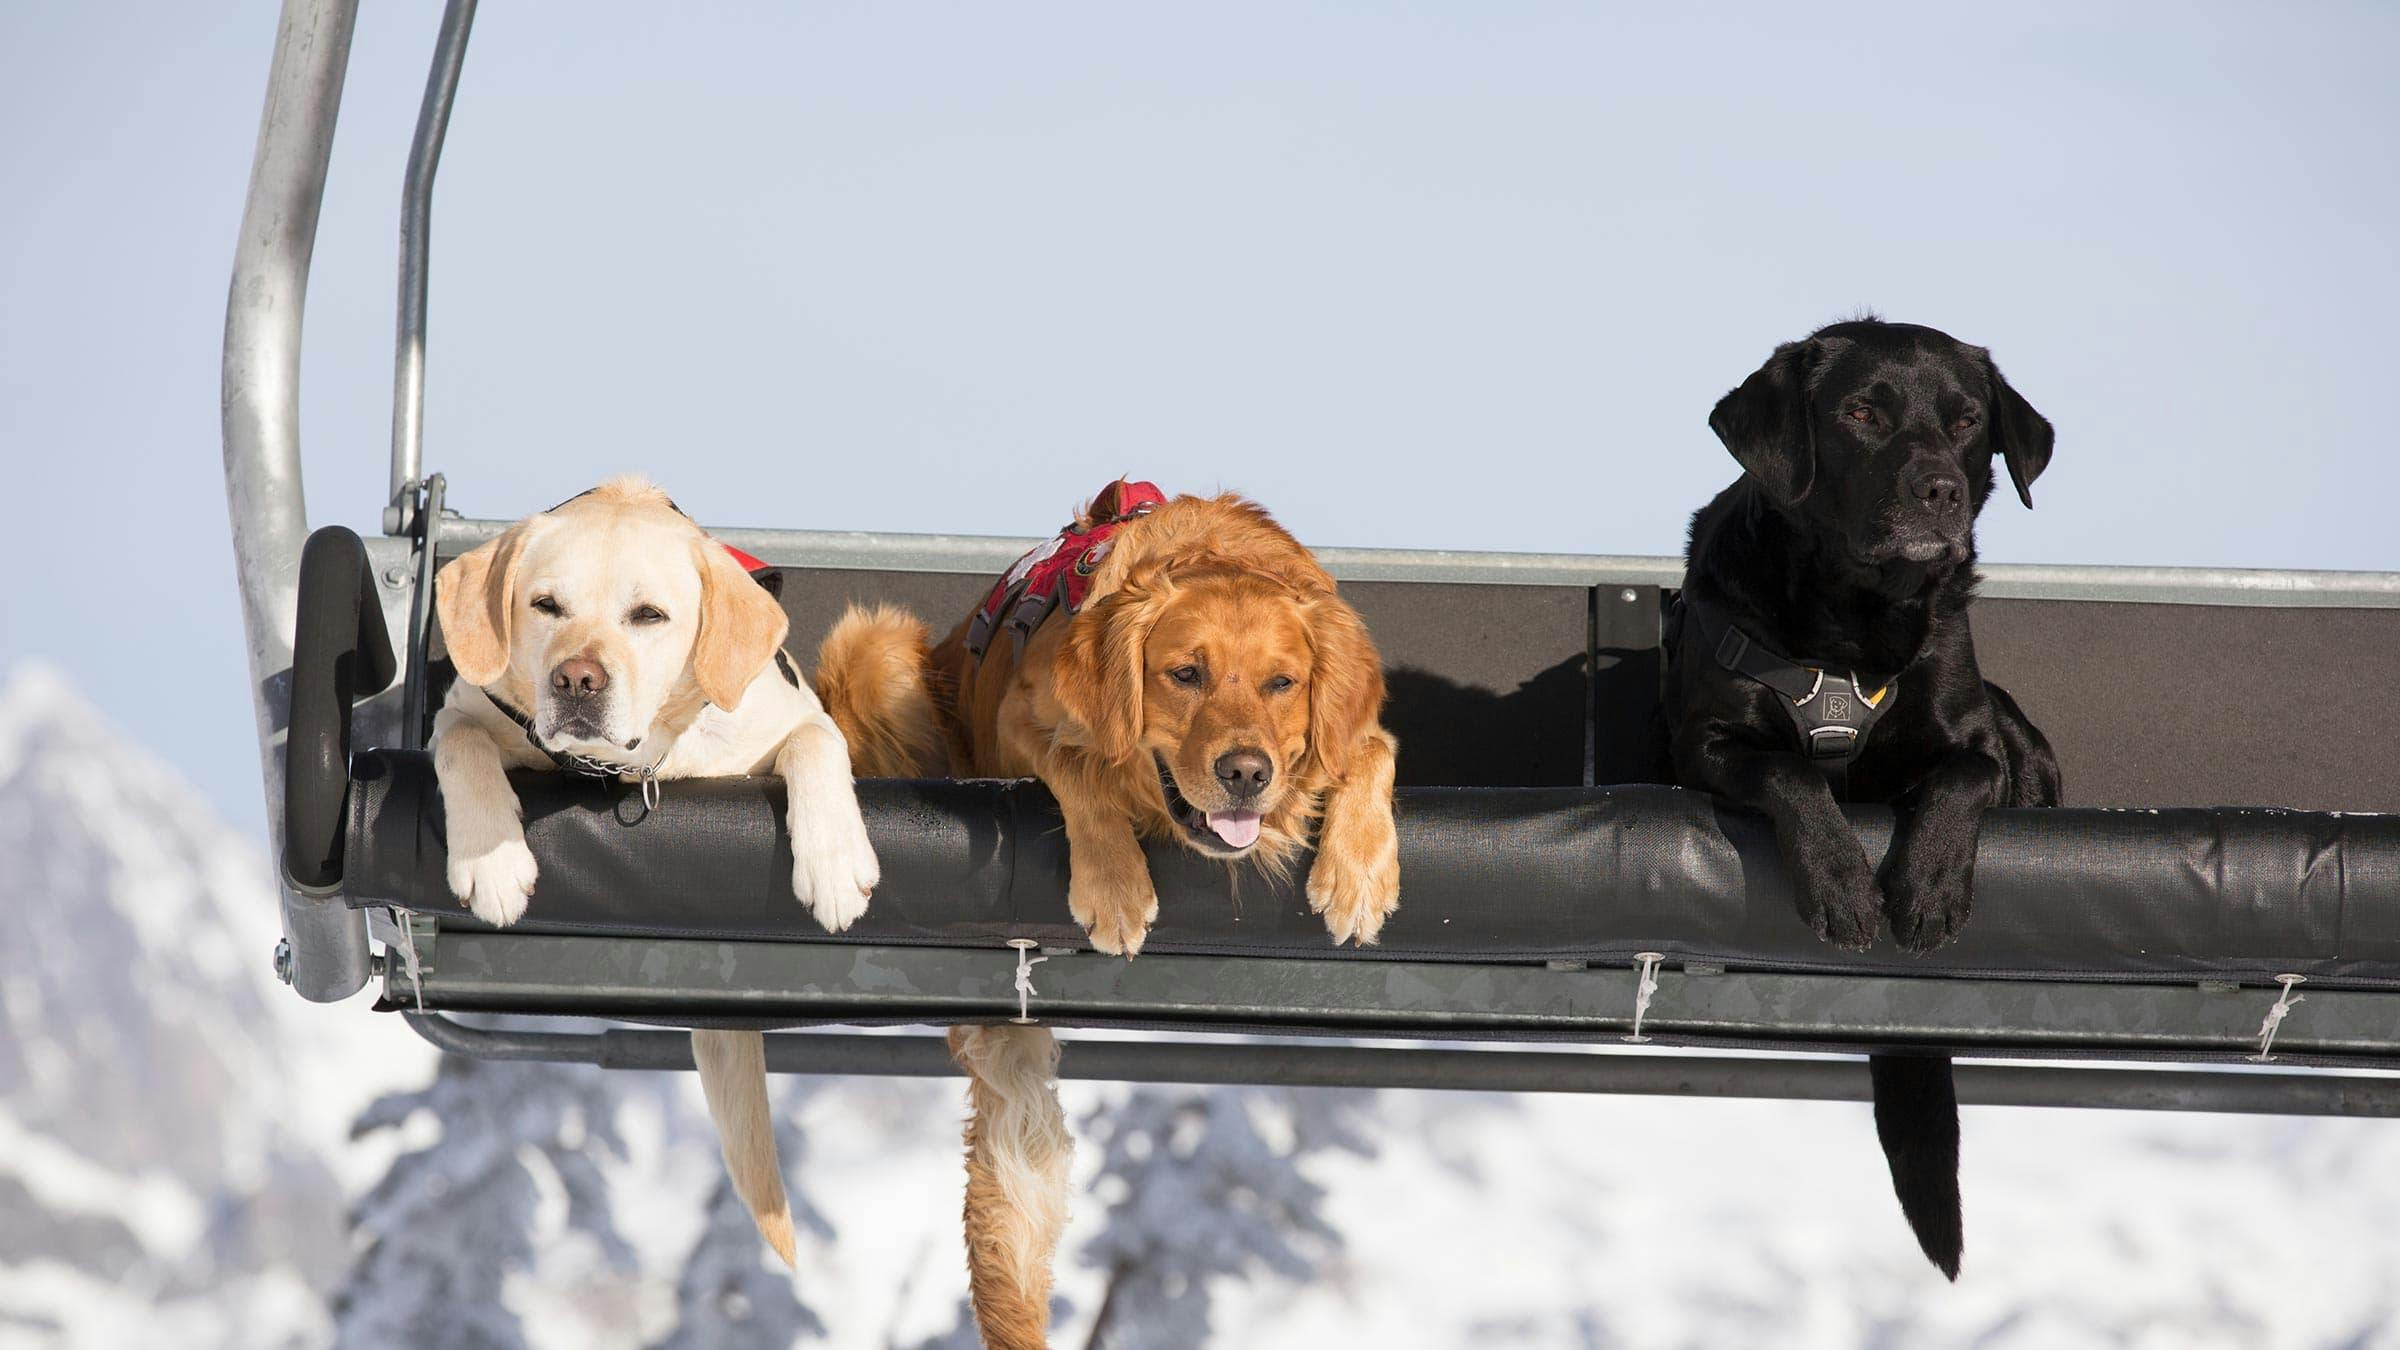 Three patrol dogs sitting on a chairlift